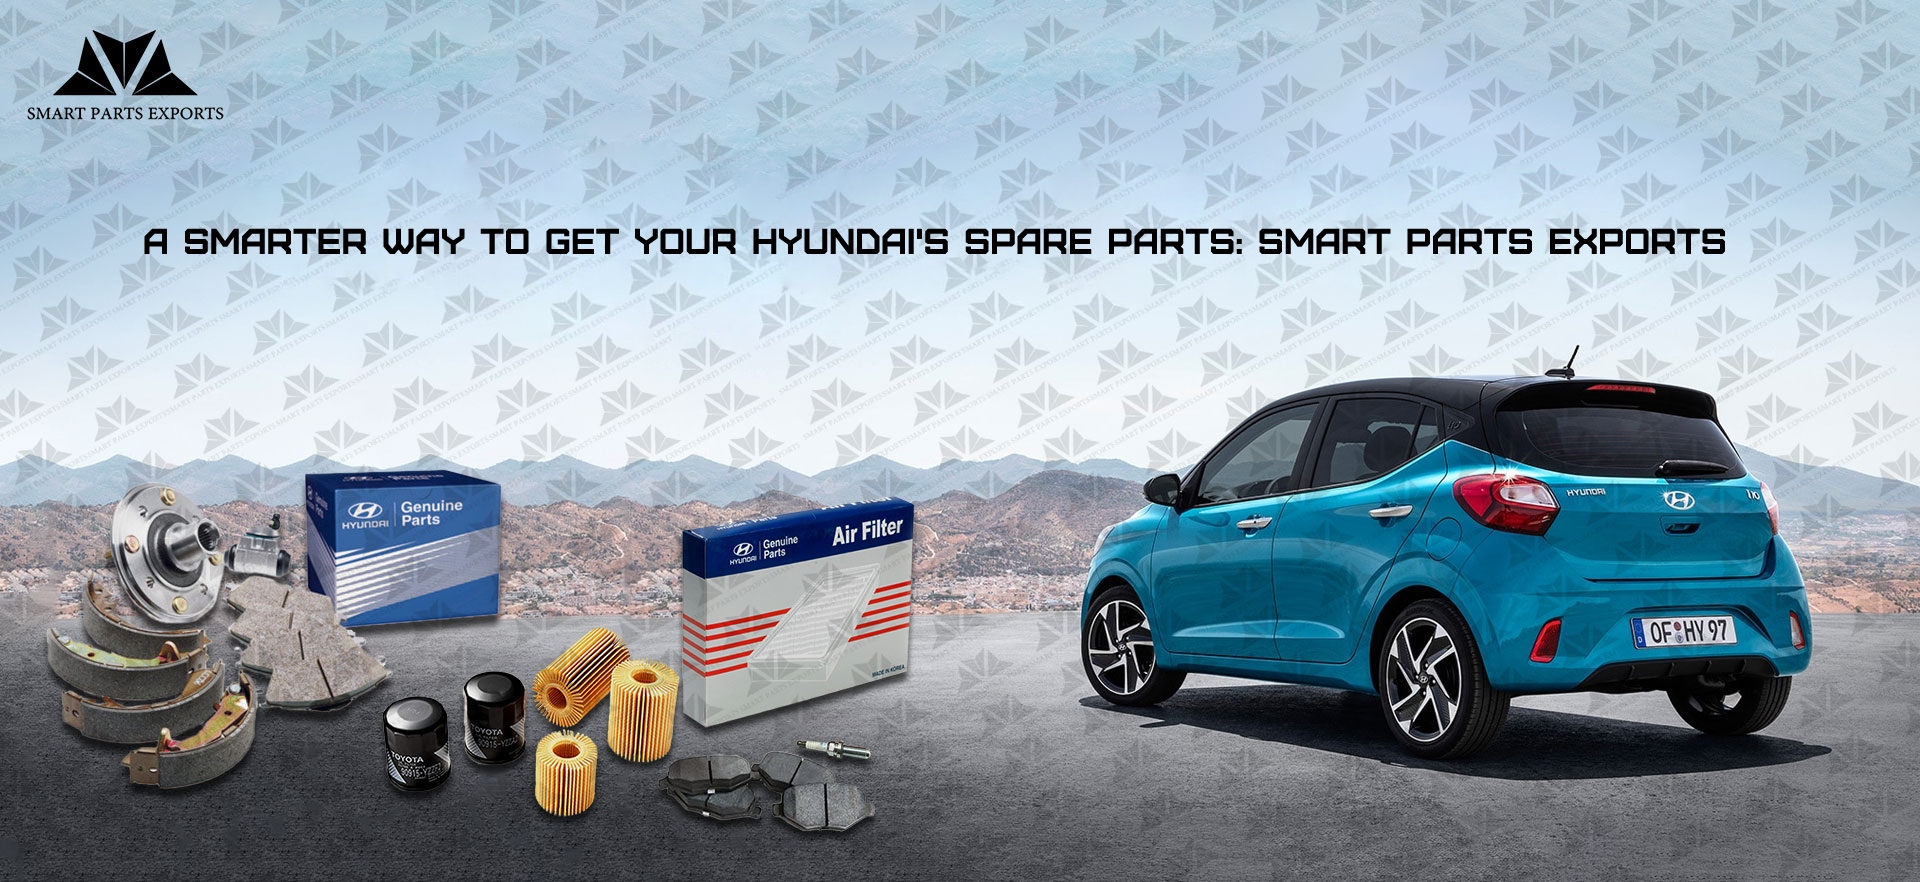 A smarter way to get your Hyundai's spare parts: Smart Parts Exports